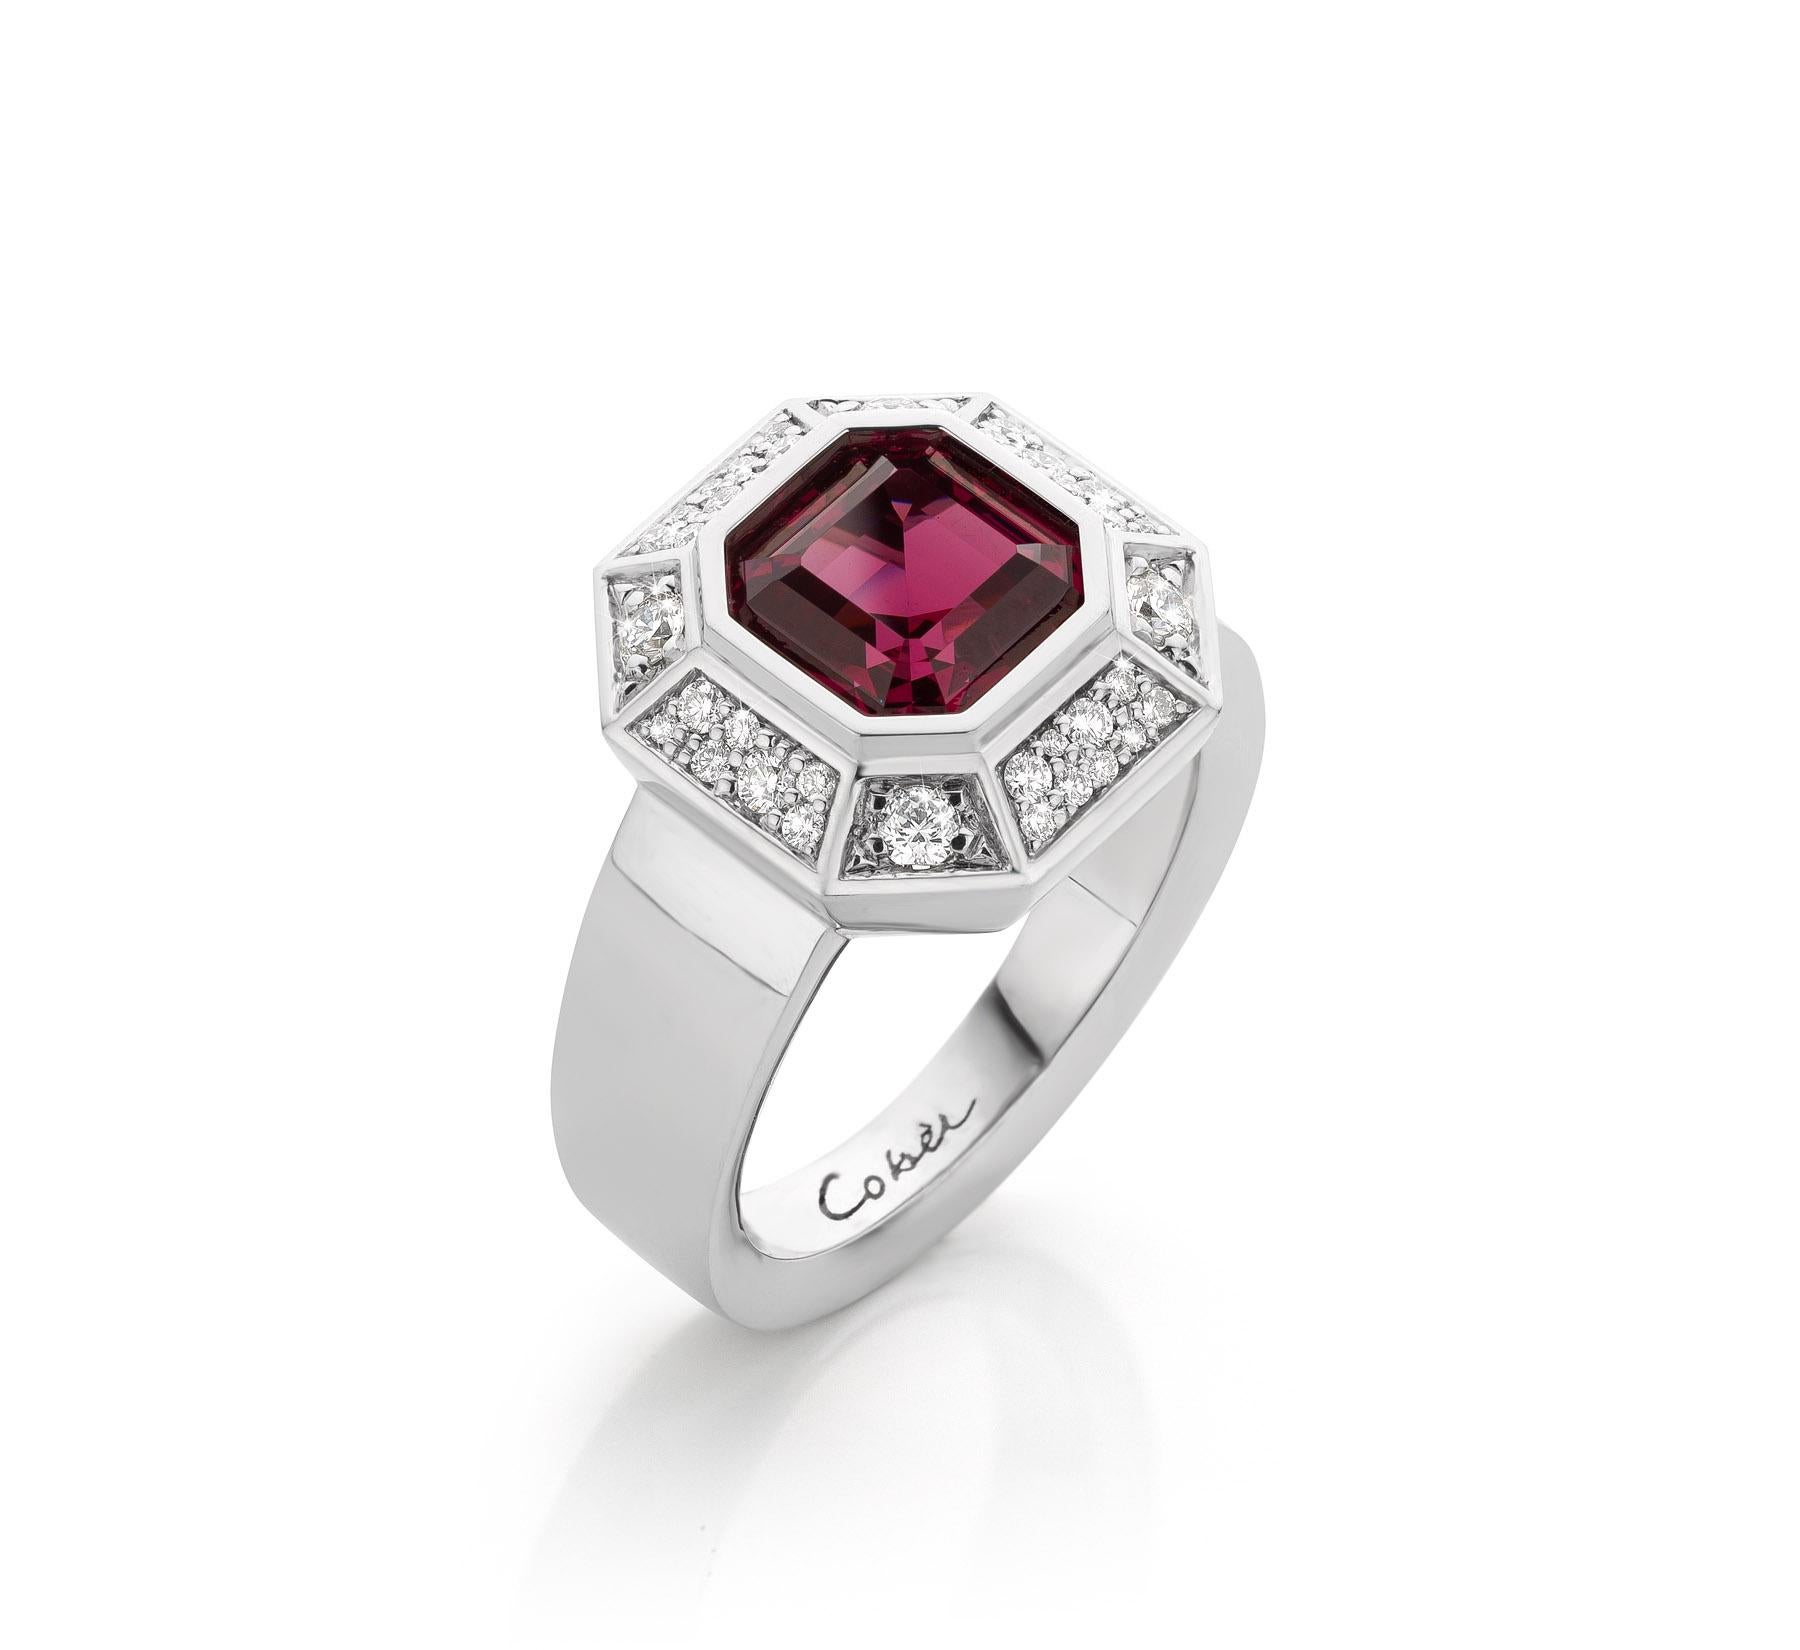 For Sale:  Cober “Catharina” 18K white gold ring with a Asscher-cut Garnet and 30 Diamonds 4